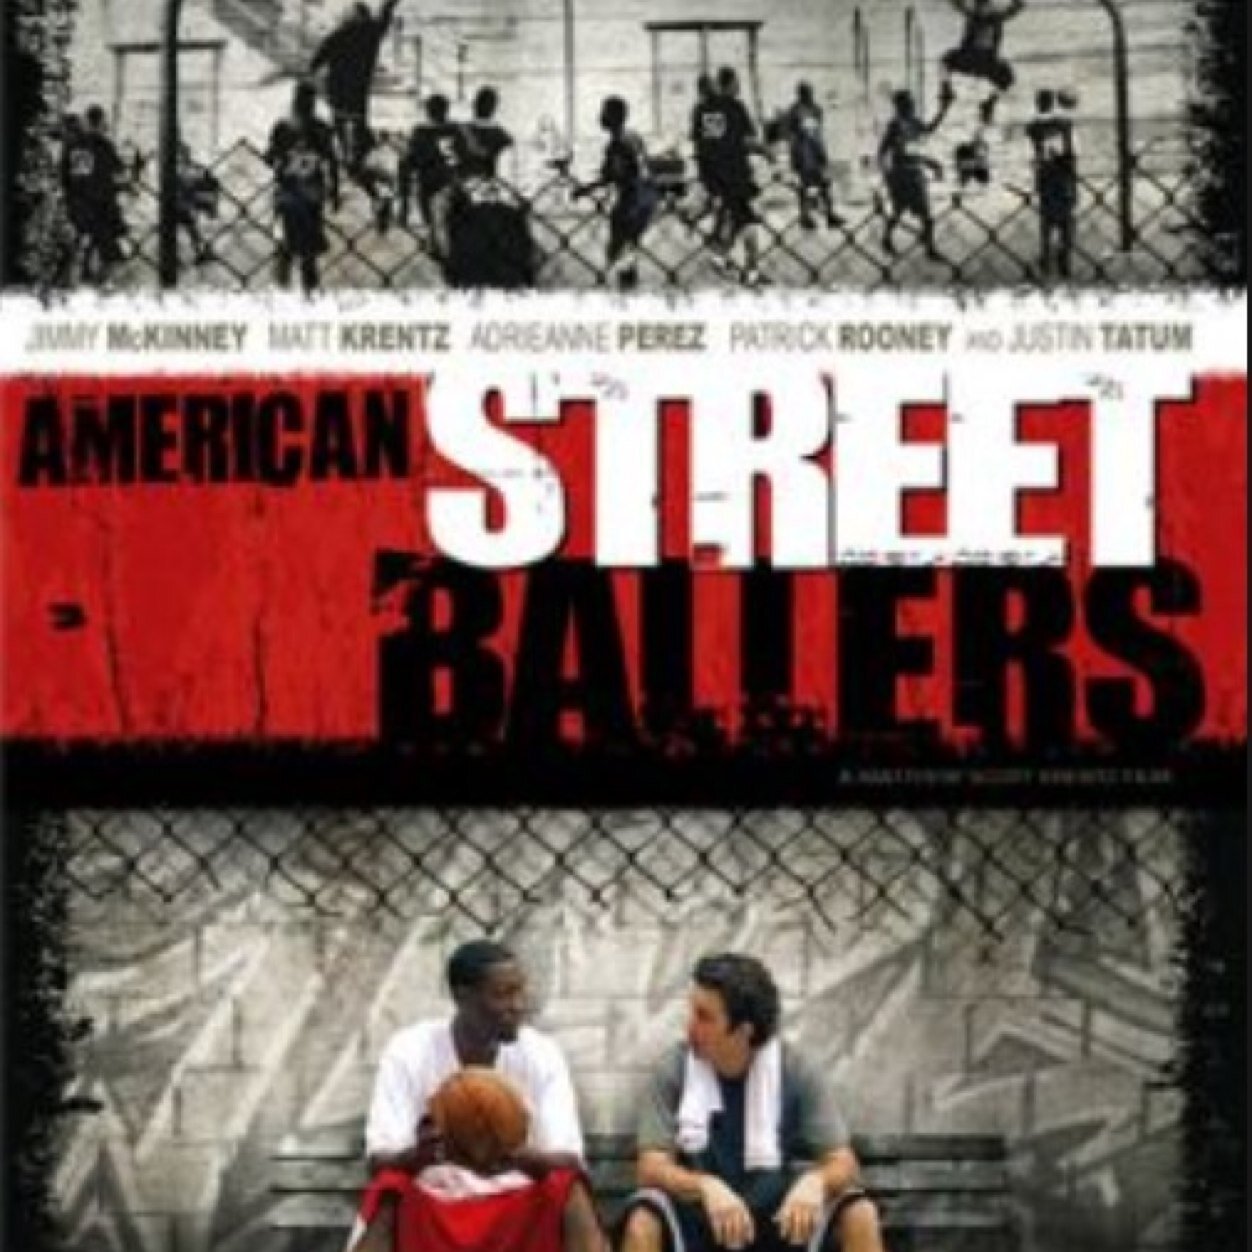 The Award-Winning Sports Drama AMERICAN STREETBALLERS released by Warner Brothers. Watch on Netflix, iTunes. Buy Special Edition here: http://t.co/VBjm8mh94B